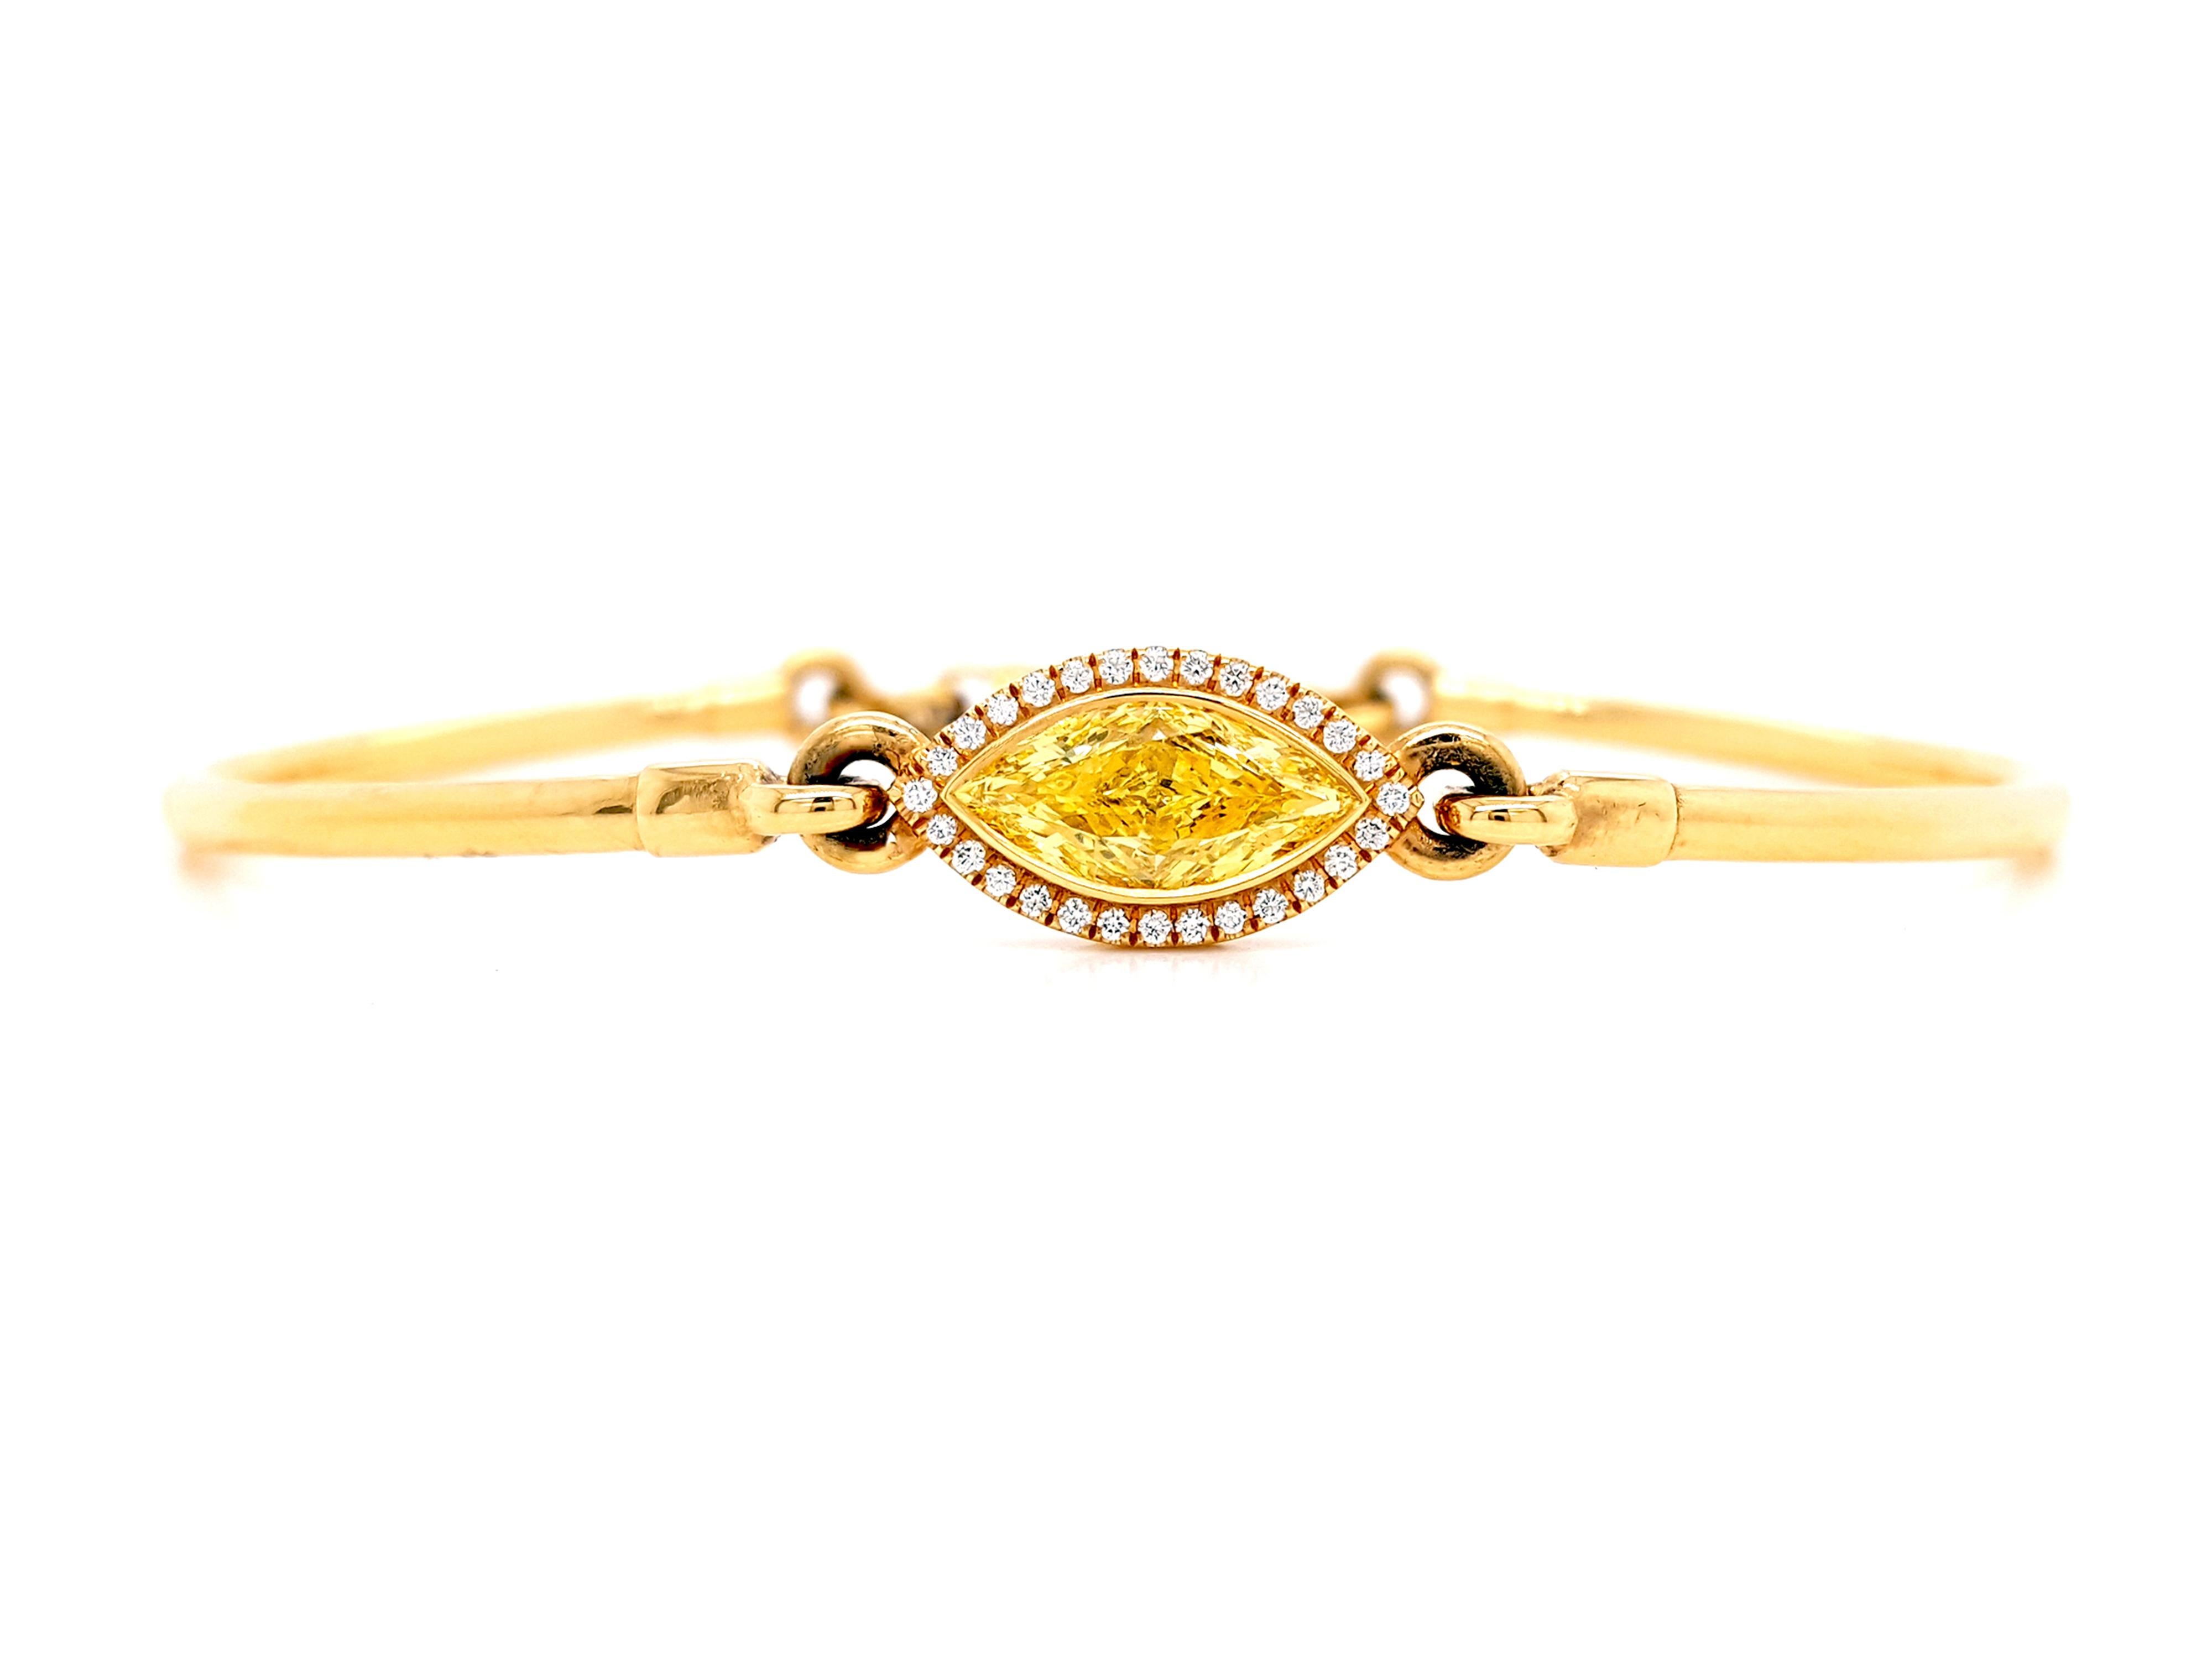 An elegant 1.25 carat total weight Fancy Intense Yellow Diamond bangle. This gorgeous 18 karat yellow gold diamond bangle has 1.13 carat Fancy Intense Yellow, Marquis-cut Diamond, GIA certified as VS2 clarity in the center, surrounded by a single